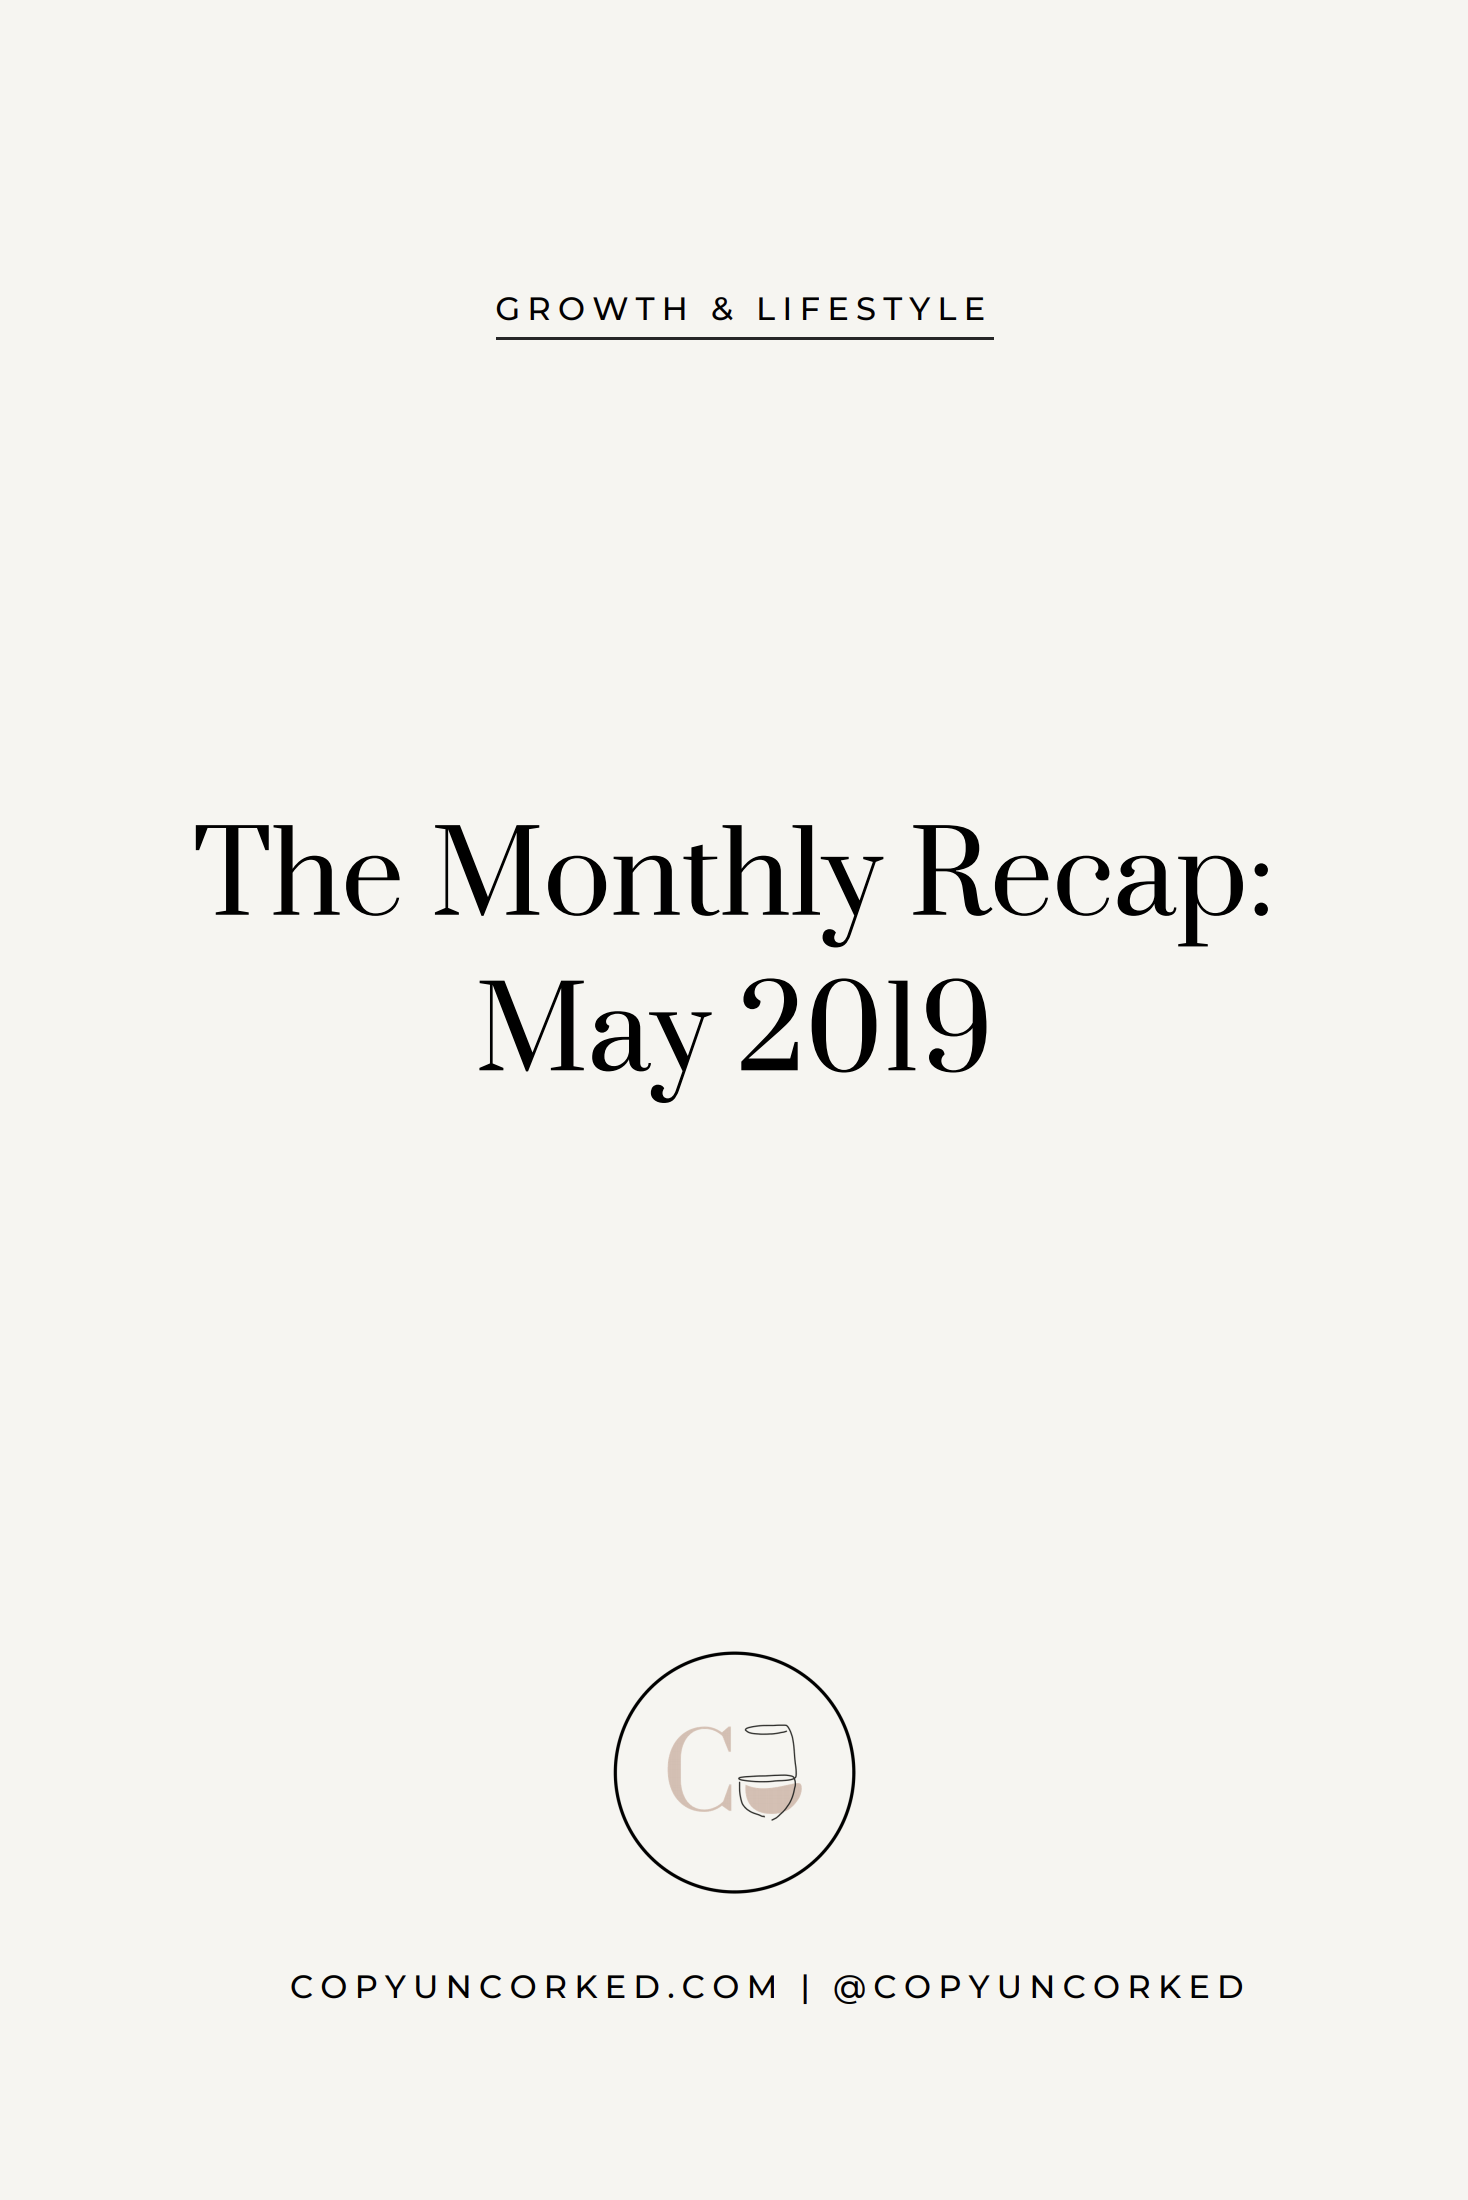 The Monthly Recap: May 2019 - copyuncorked.com